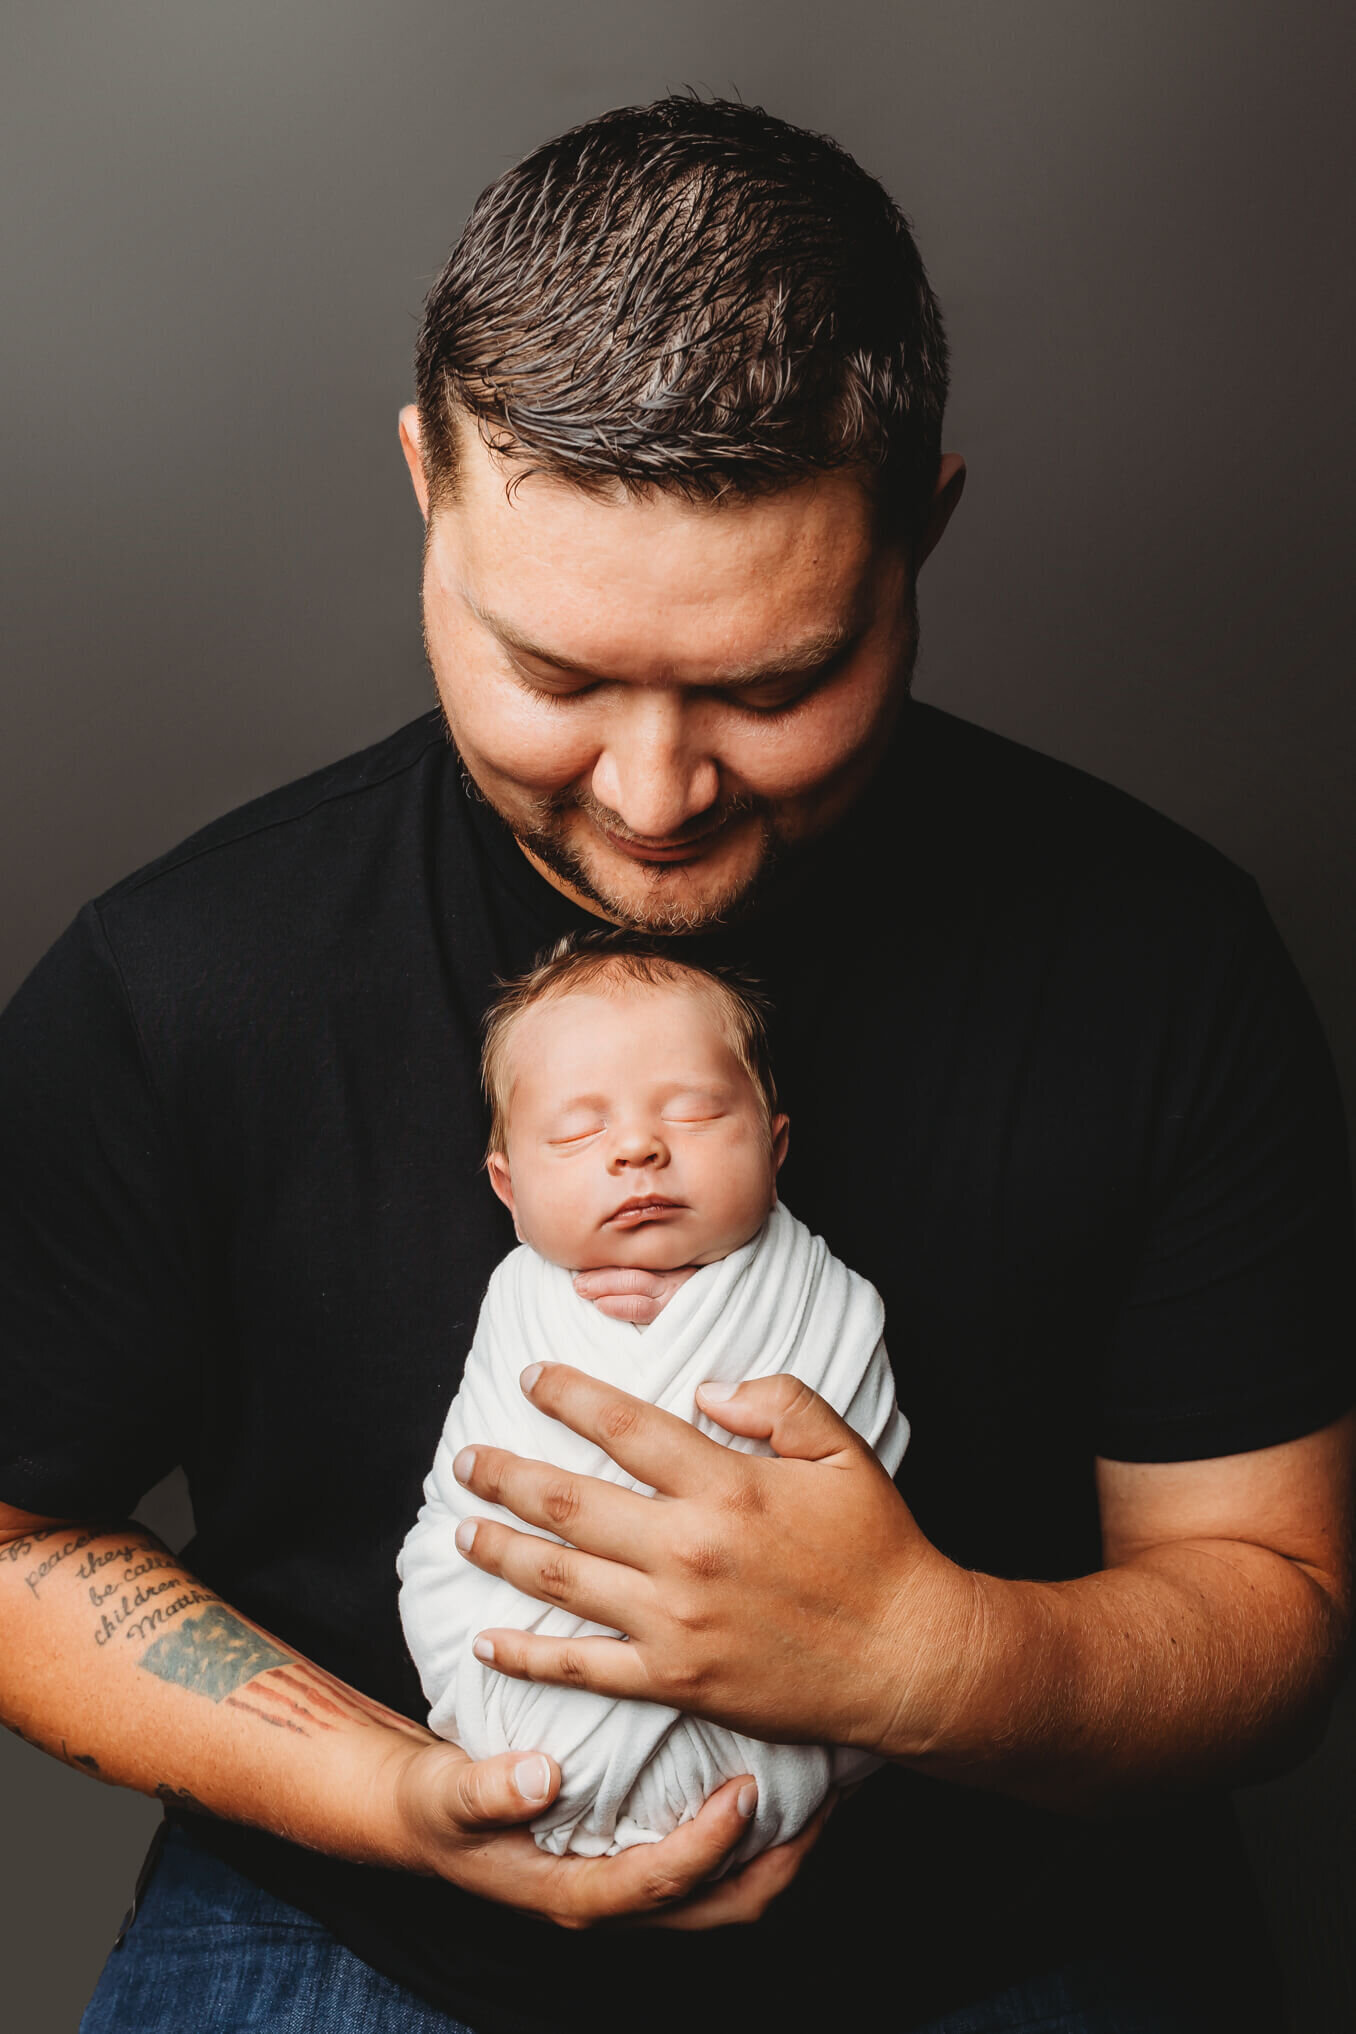 Dad in a black shirt holding swaddled newborn baby